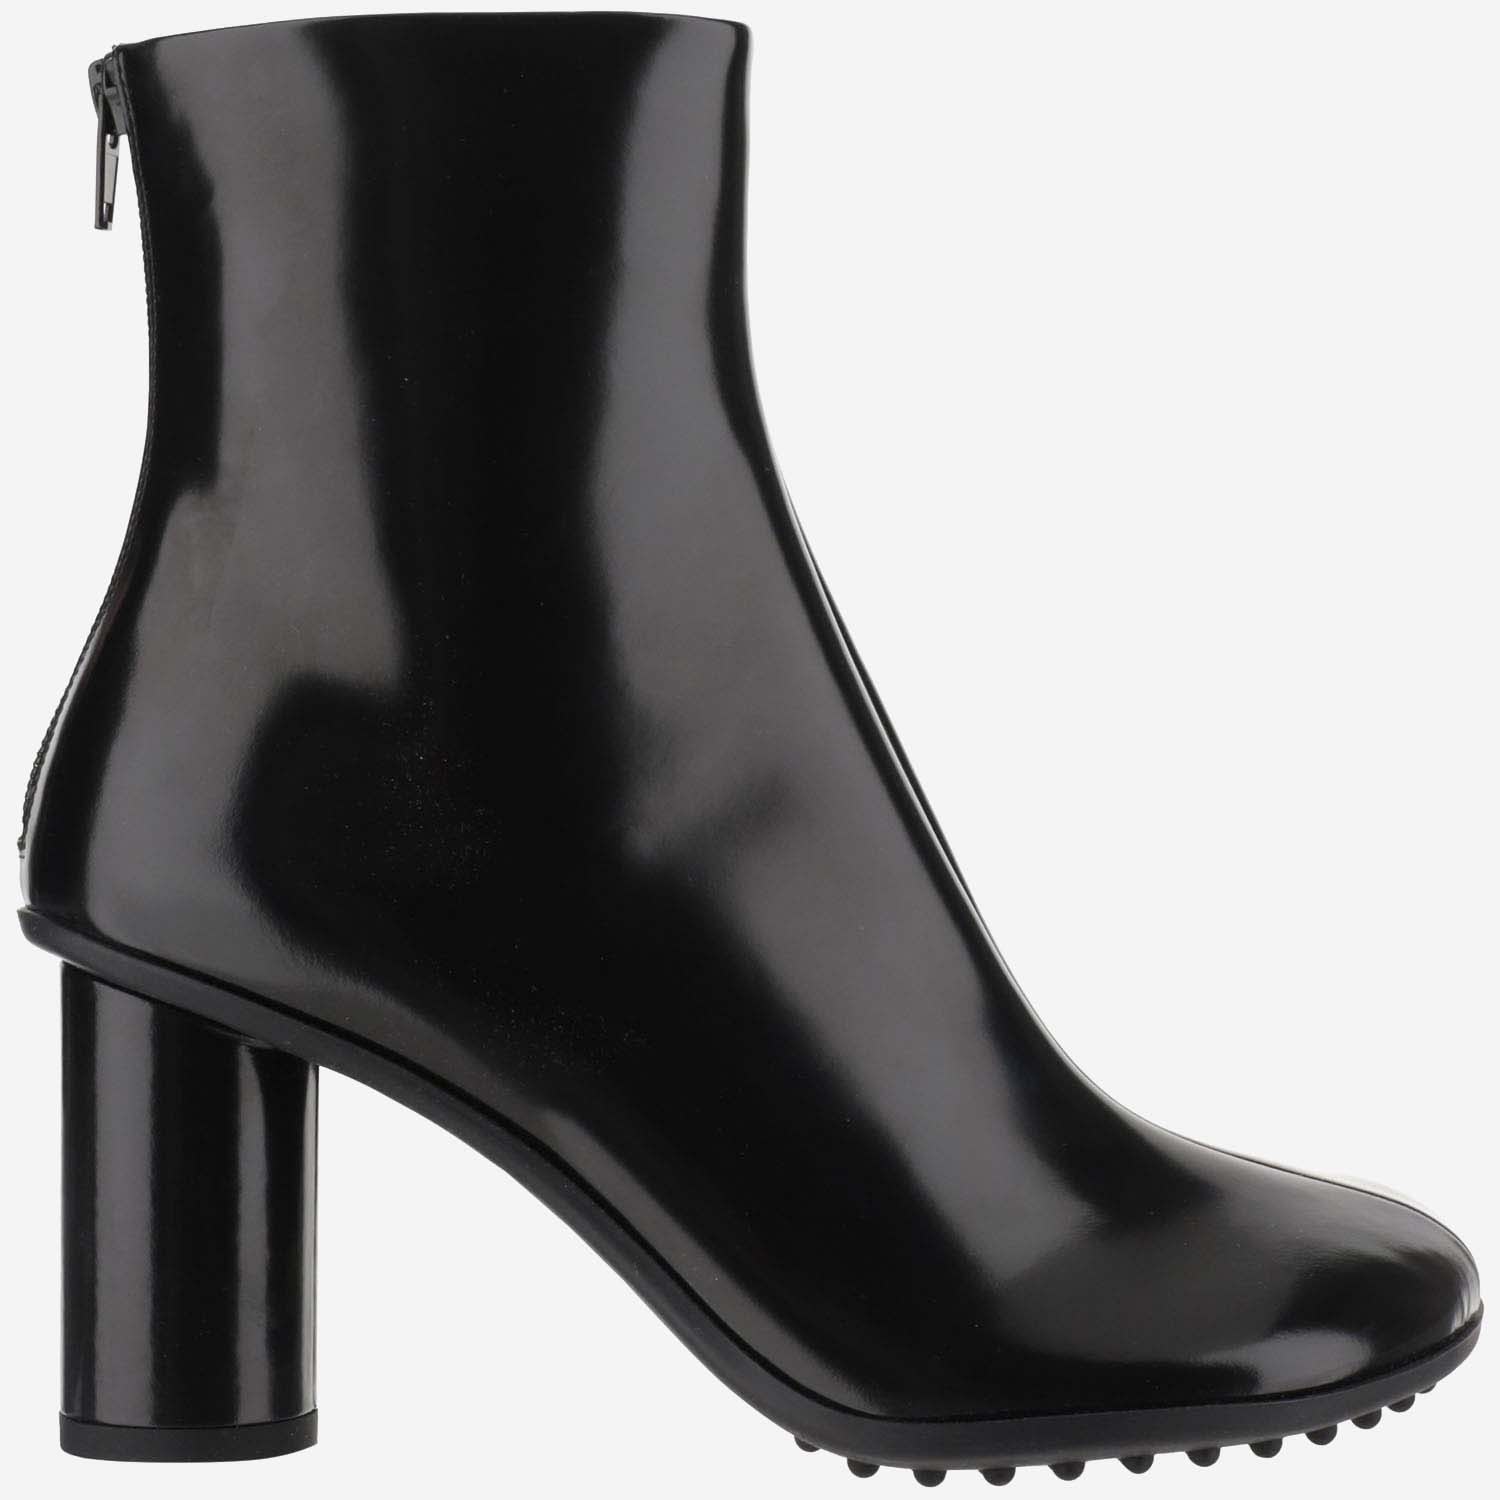 Atomic Ankle Boots